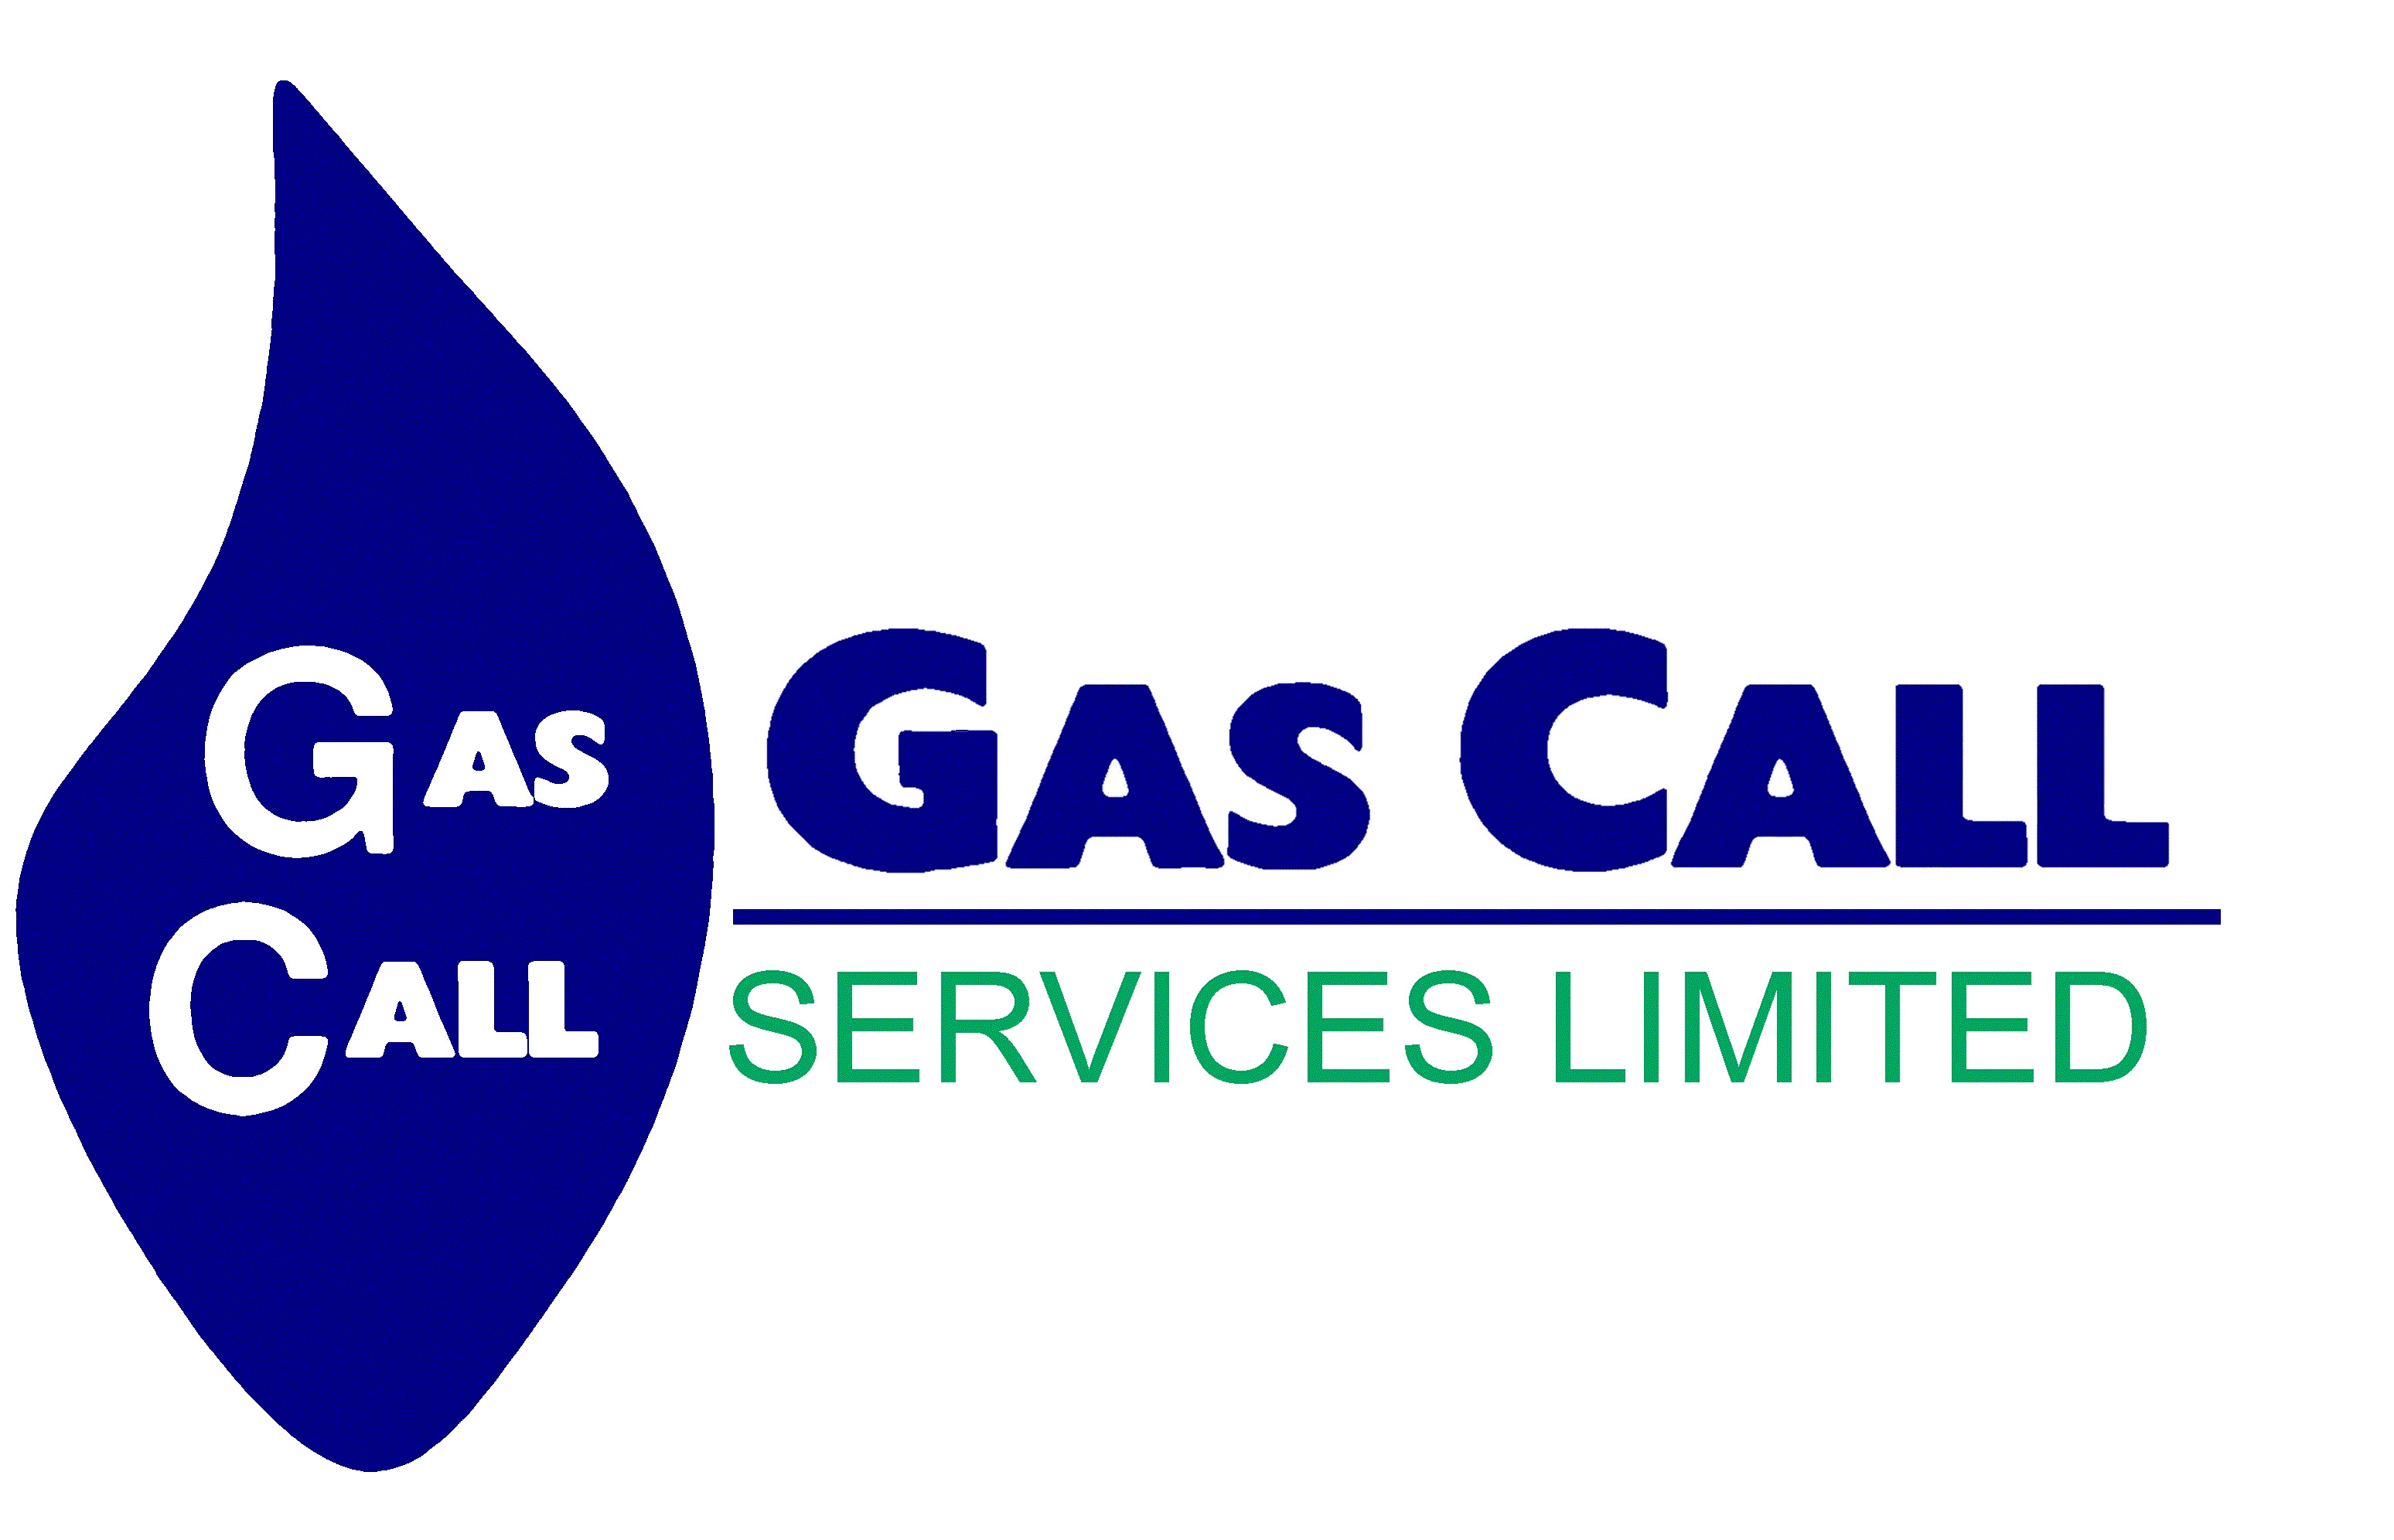 Gas Call Services - Service and Repair Quality Control Inspection (In Progress) - V5.0